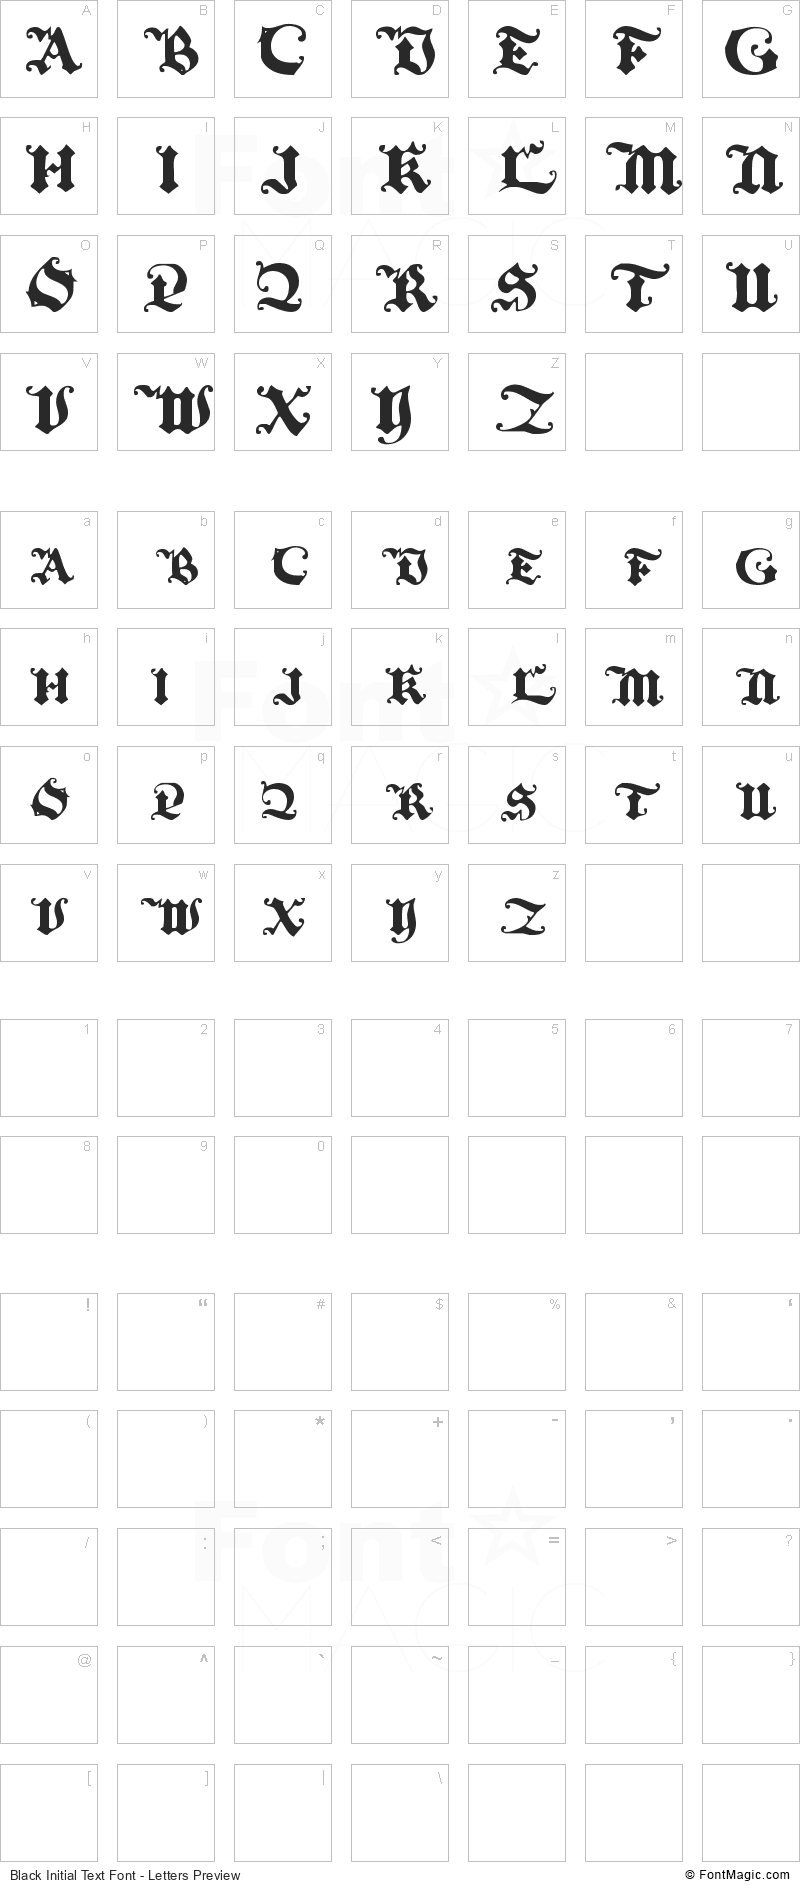 Black Initial Text Font - All Latters Preview Chart